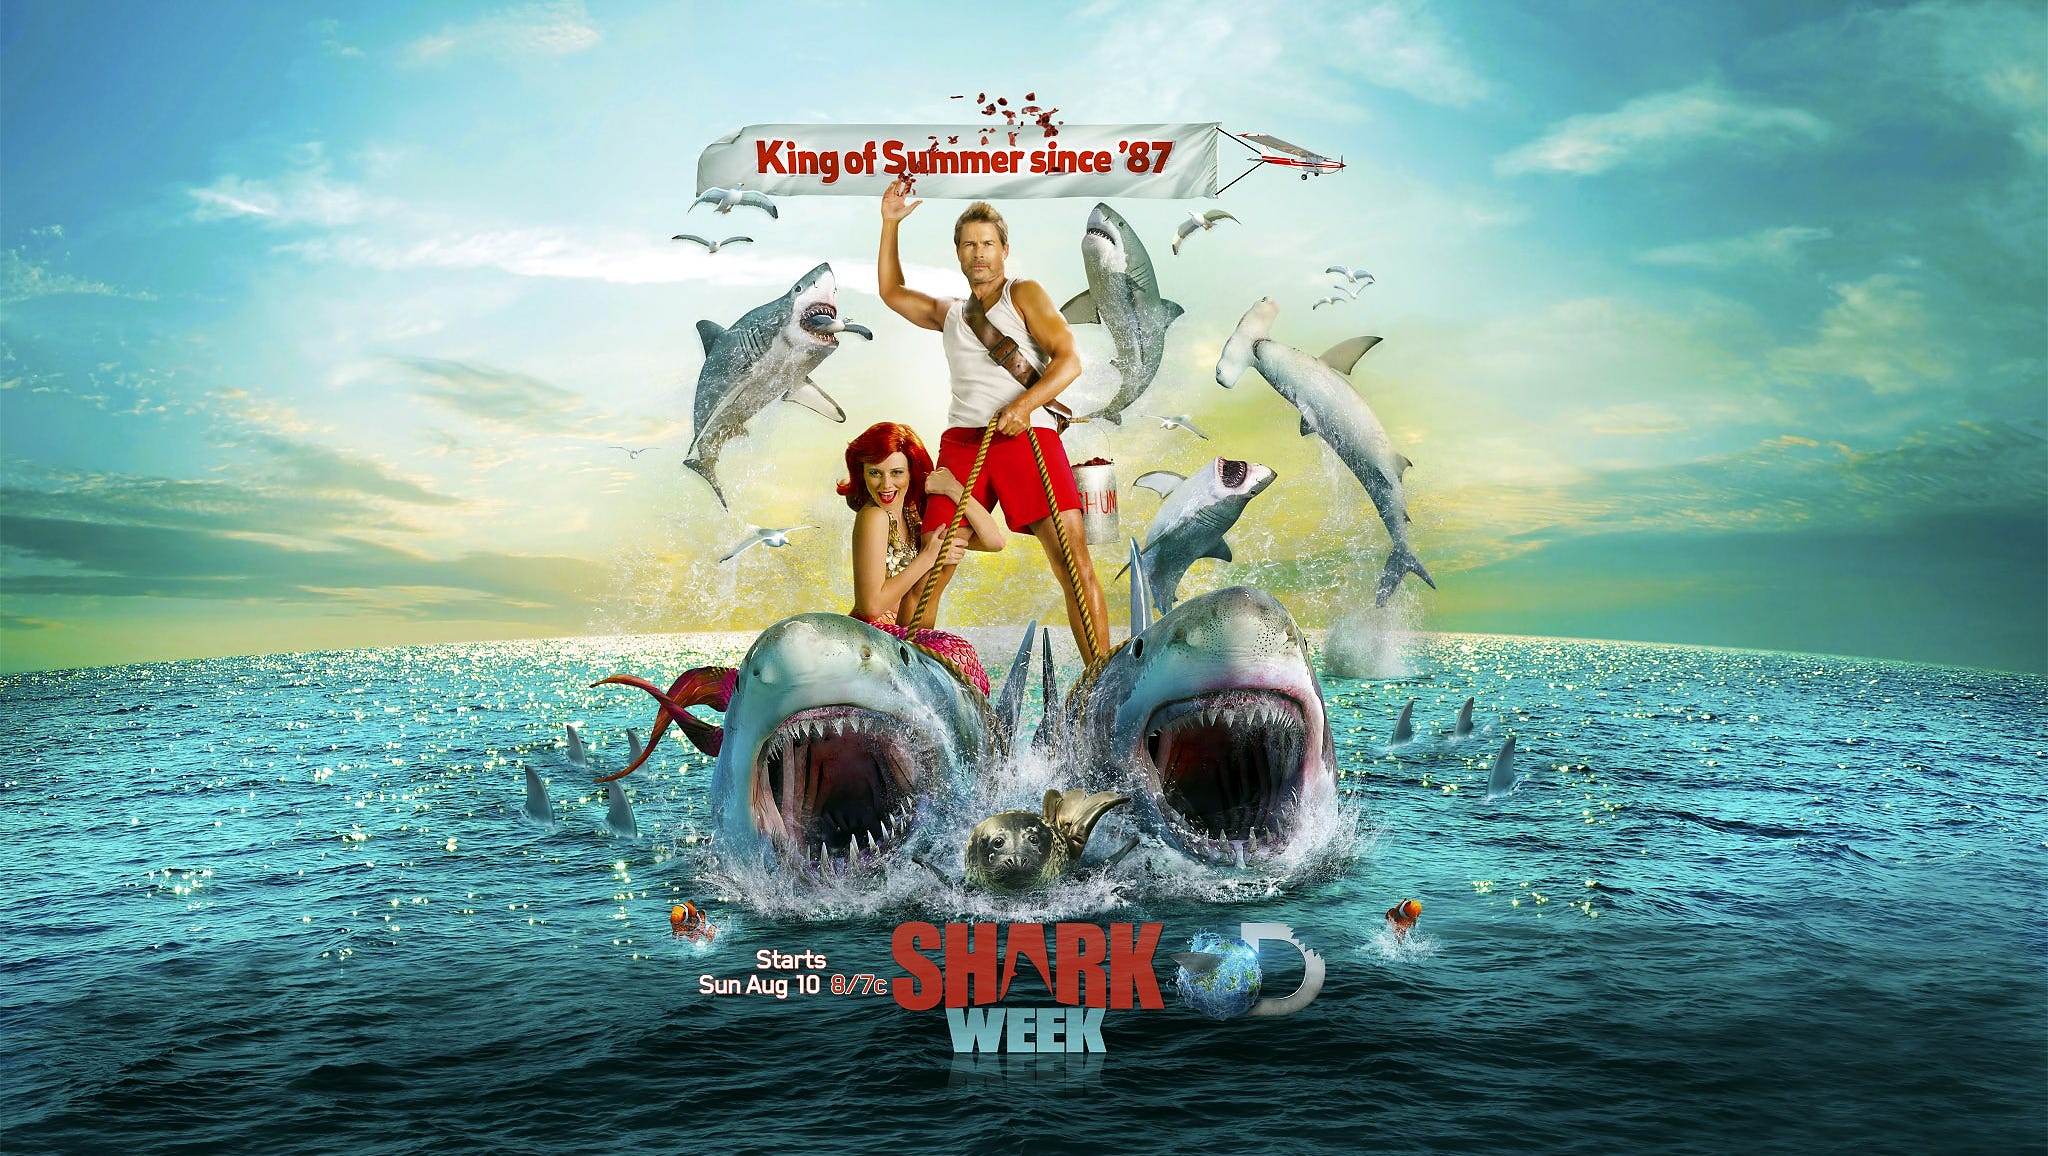 Shark Week is huge, and that's kind of a problem